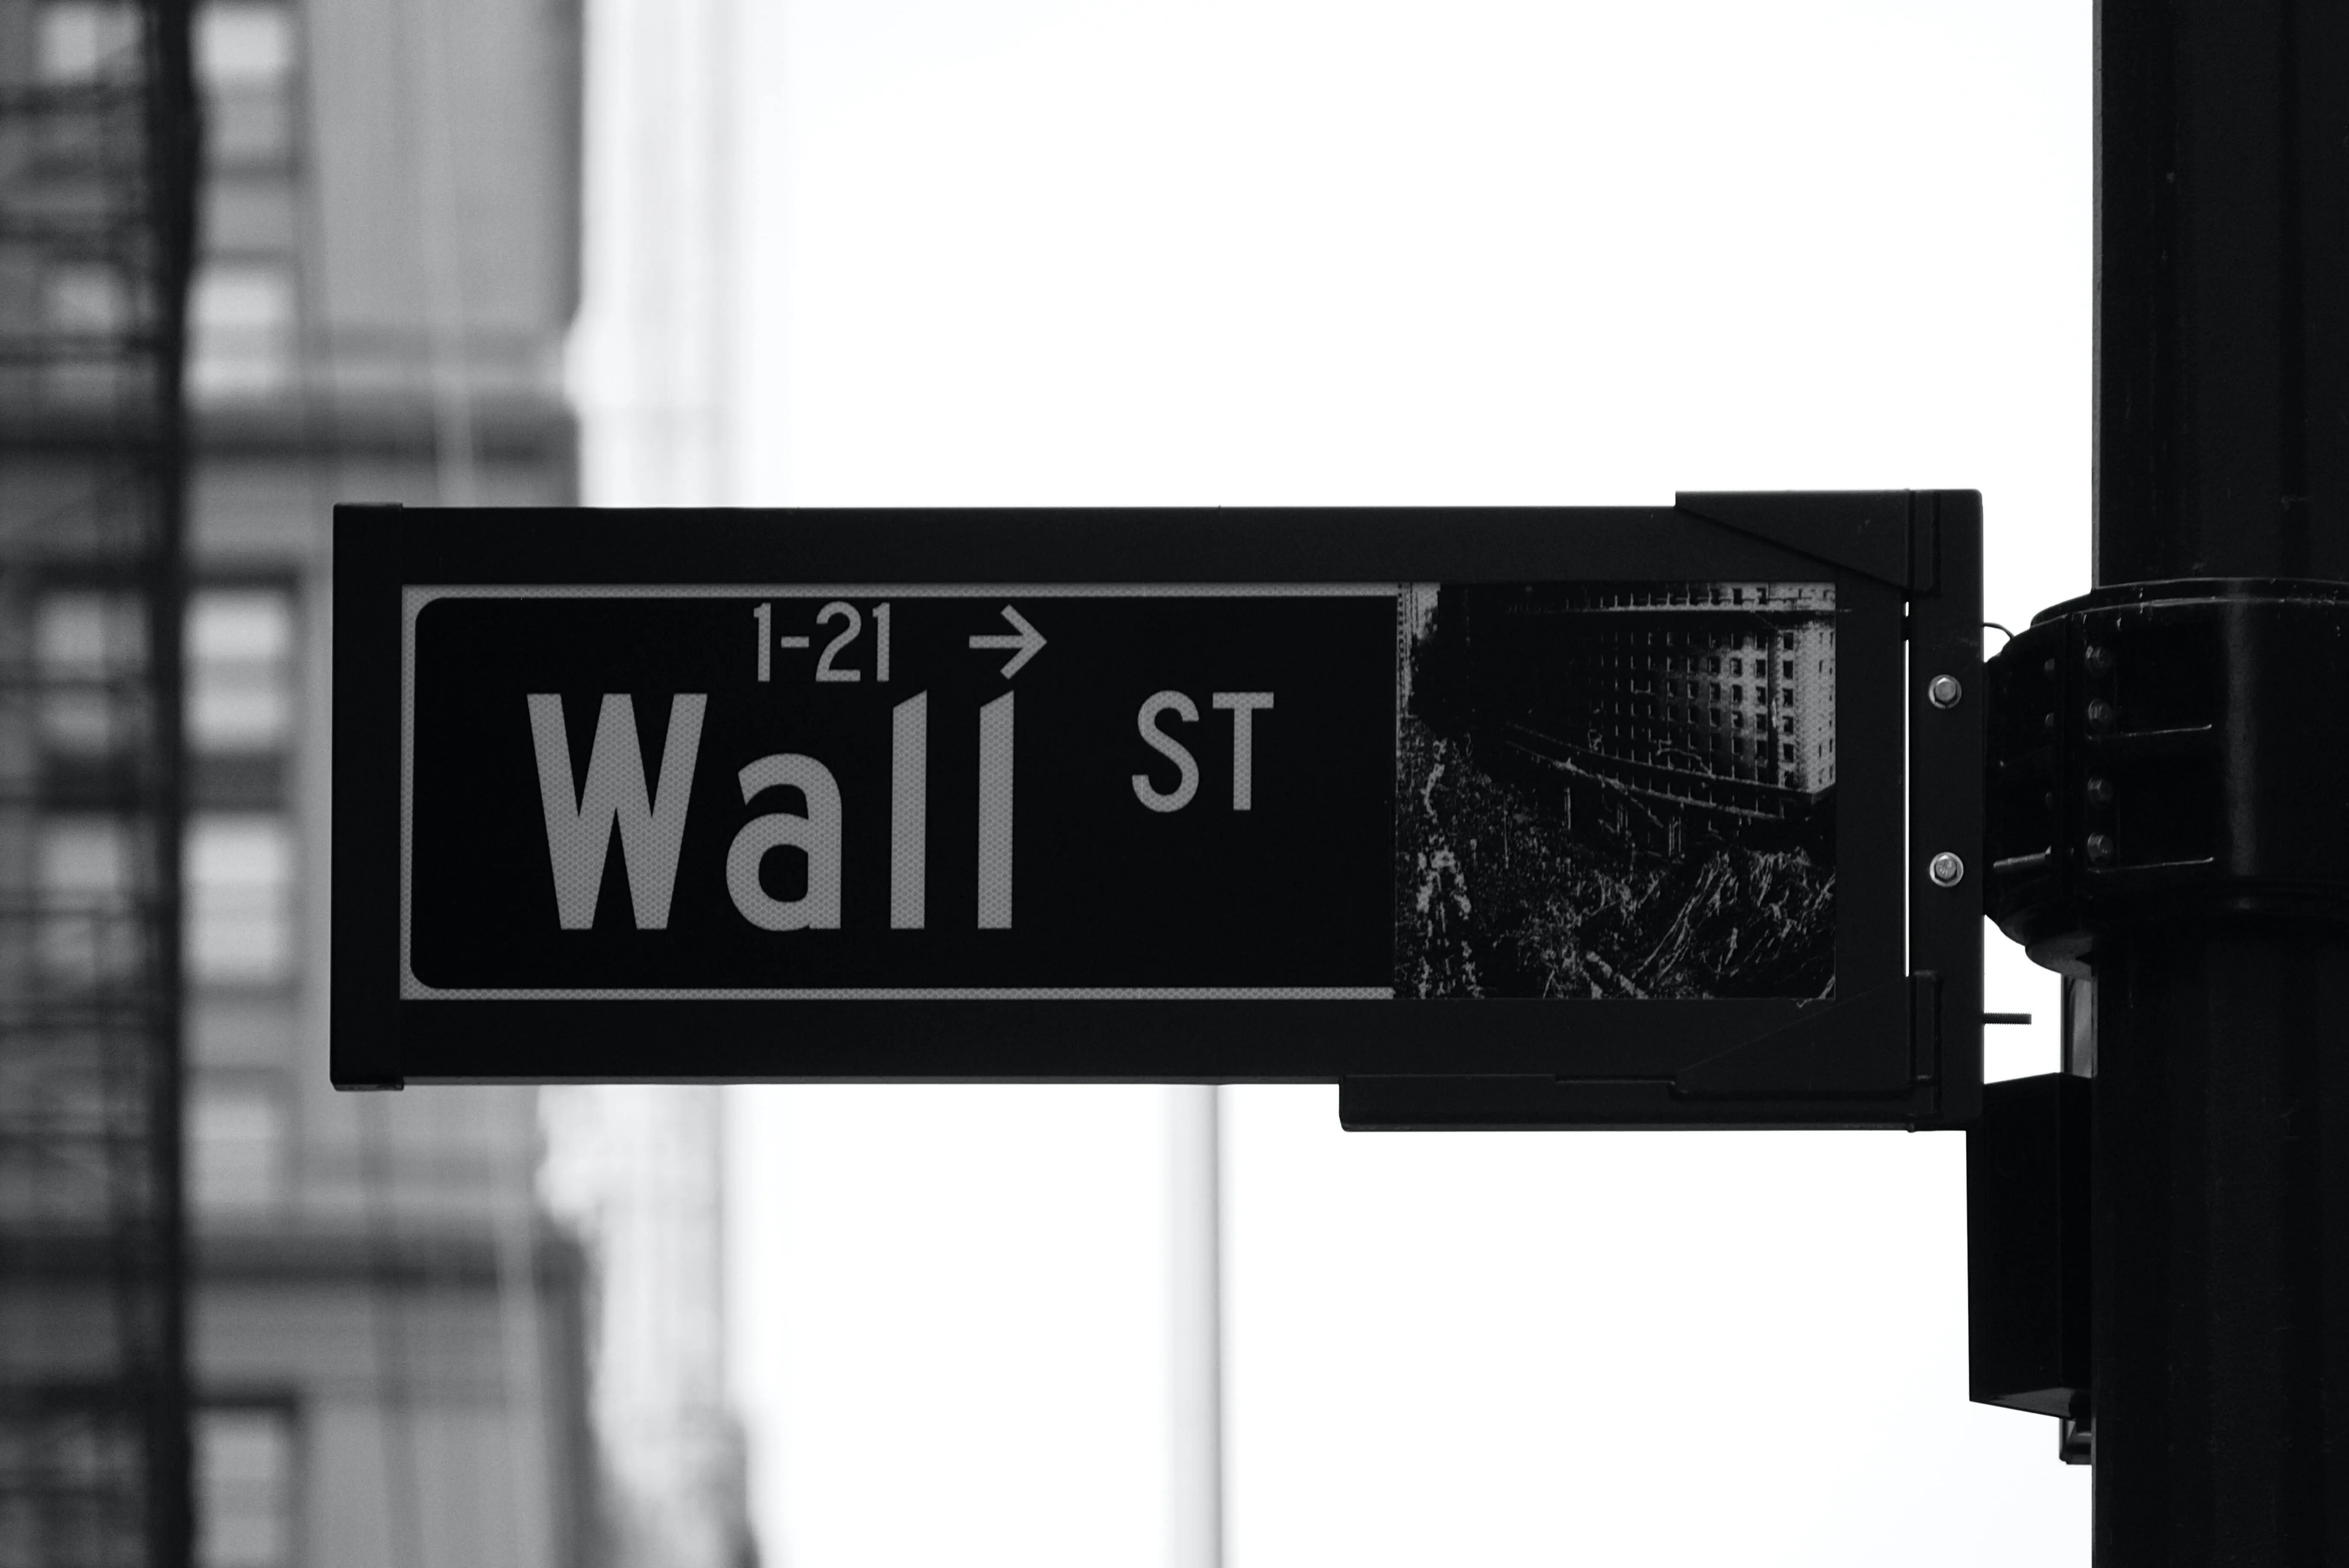 Wall St. street sign in New York City.